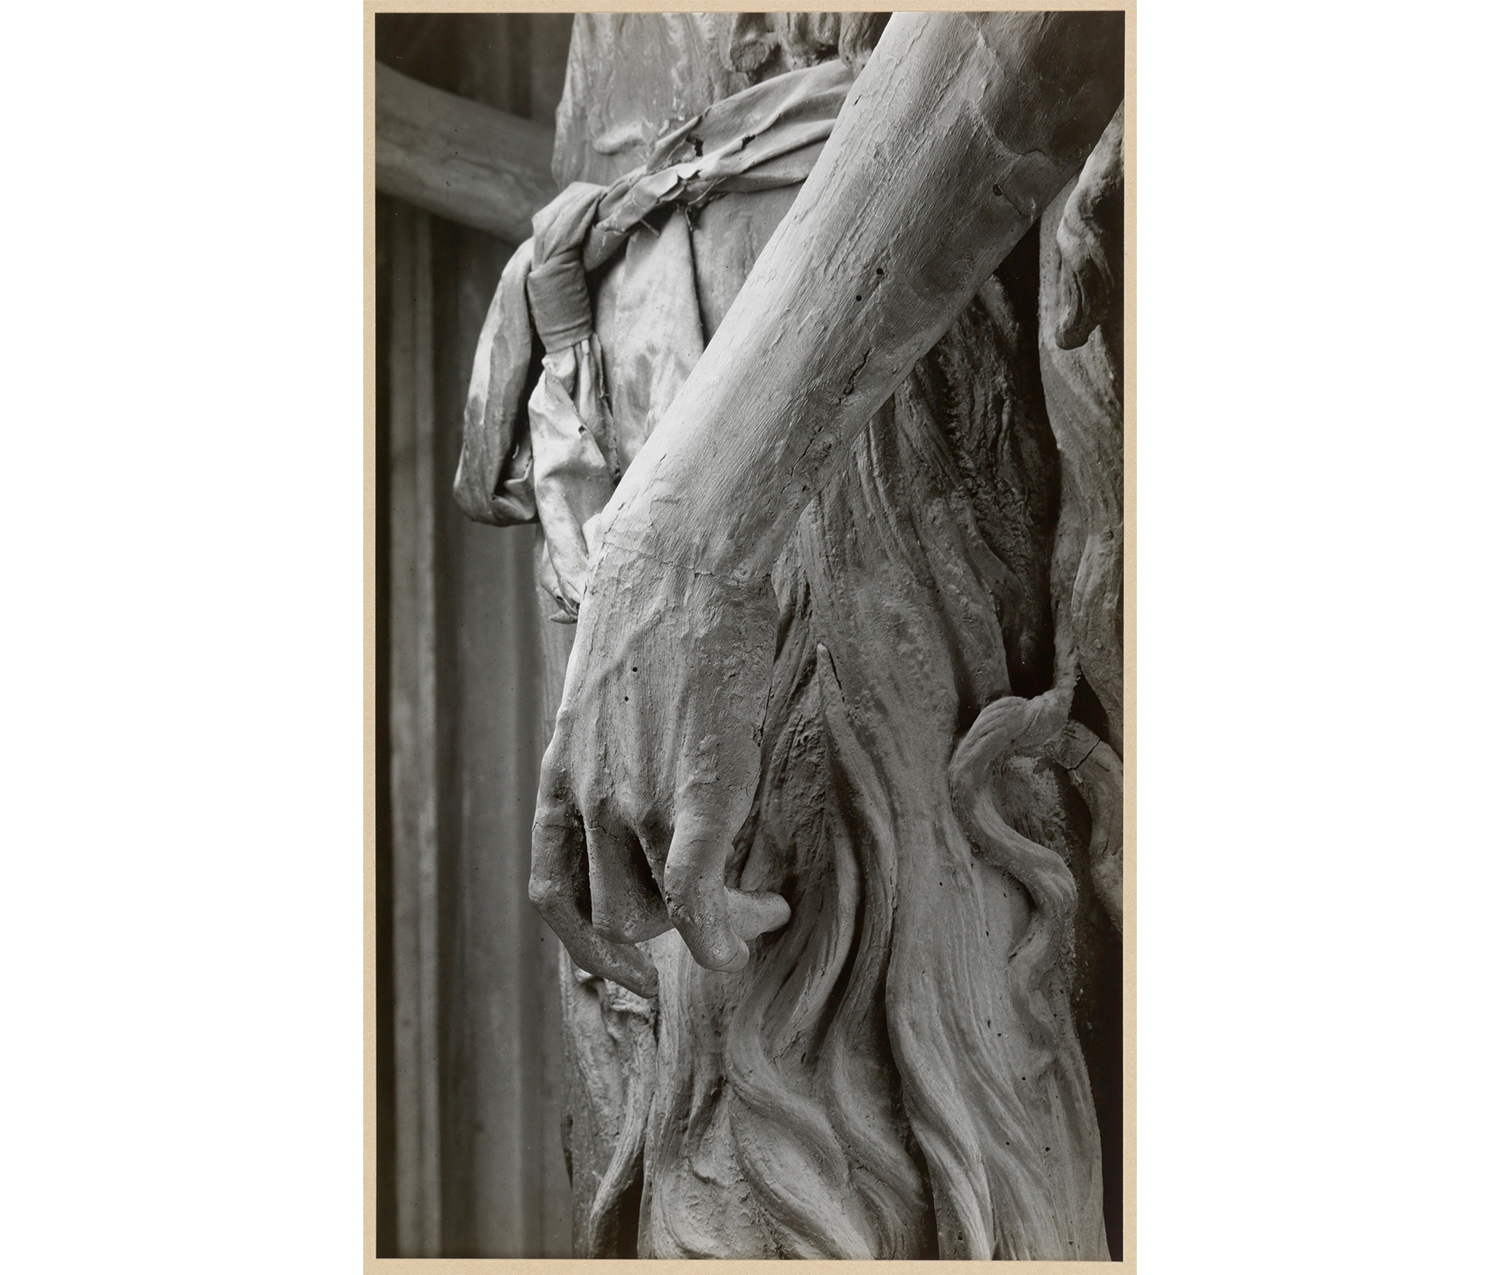 close up of the hand of a sculpture, with the folds of the sculpture's clothing in the background